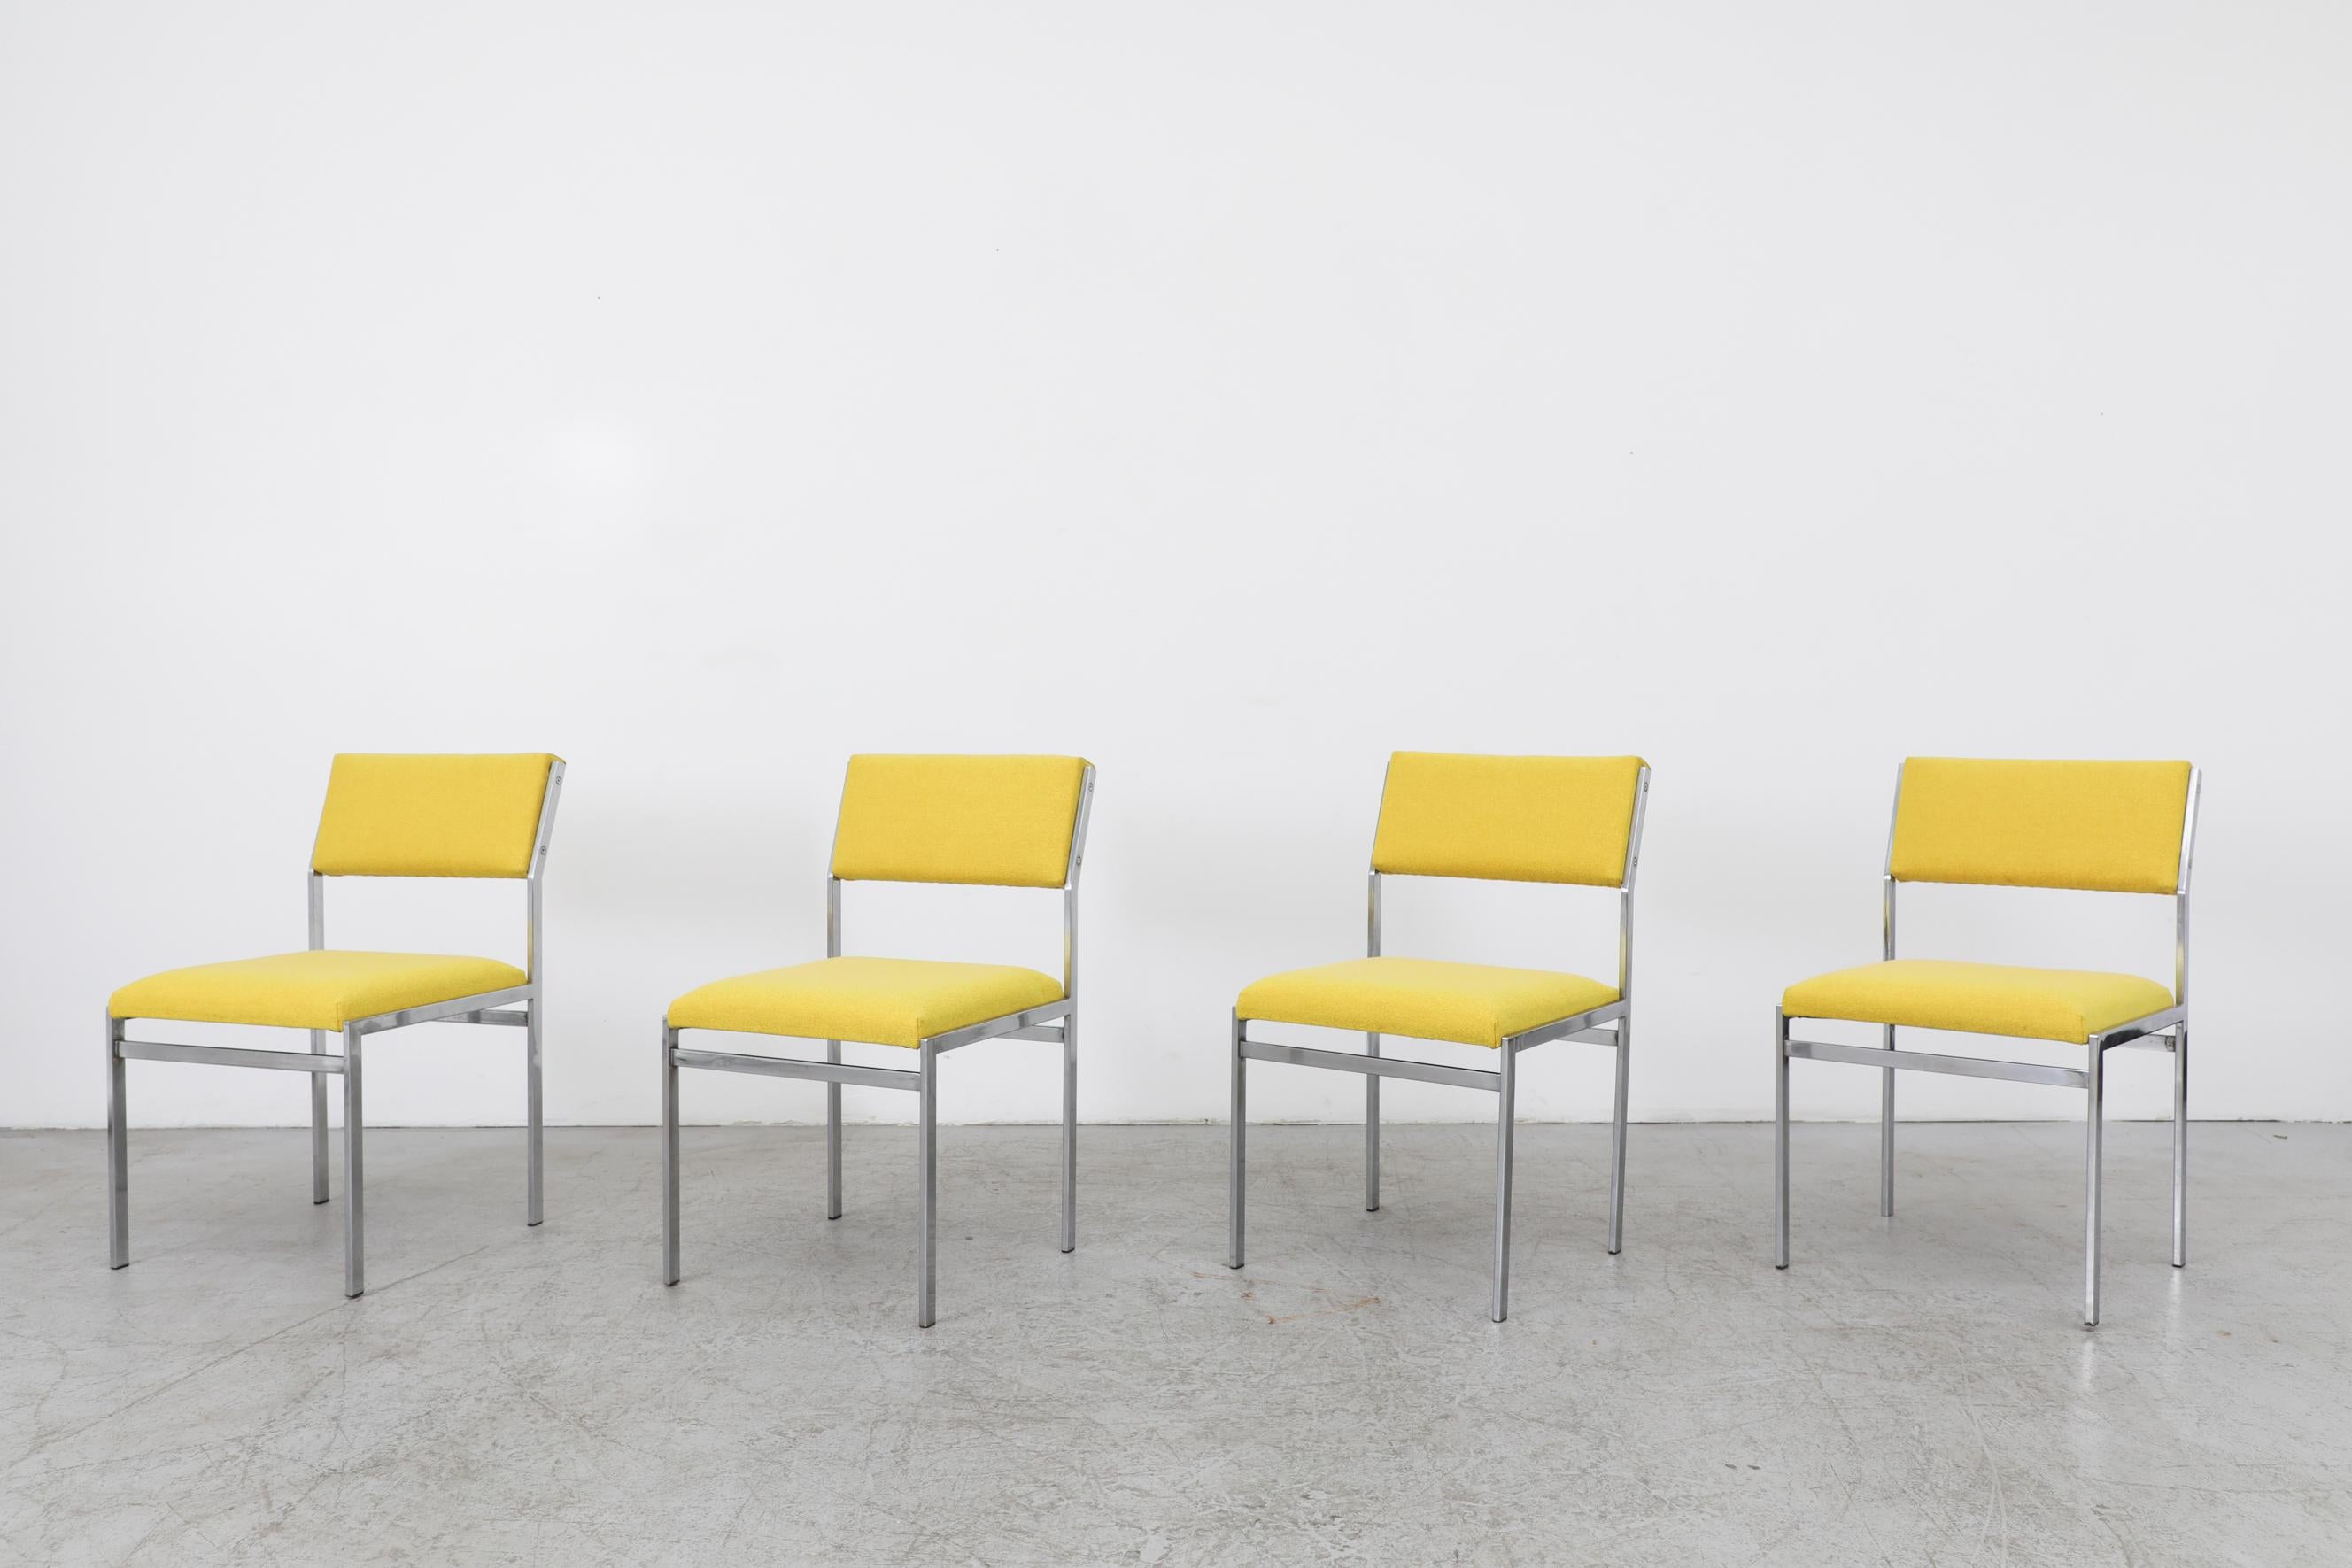 Set of 4 Cees Braakman chairs for Pastoe with newly upholstered sunshine yellow seats and chrome frames. Frames are in original condition with some minor scratches and wear, consistent with their age and use.